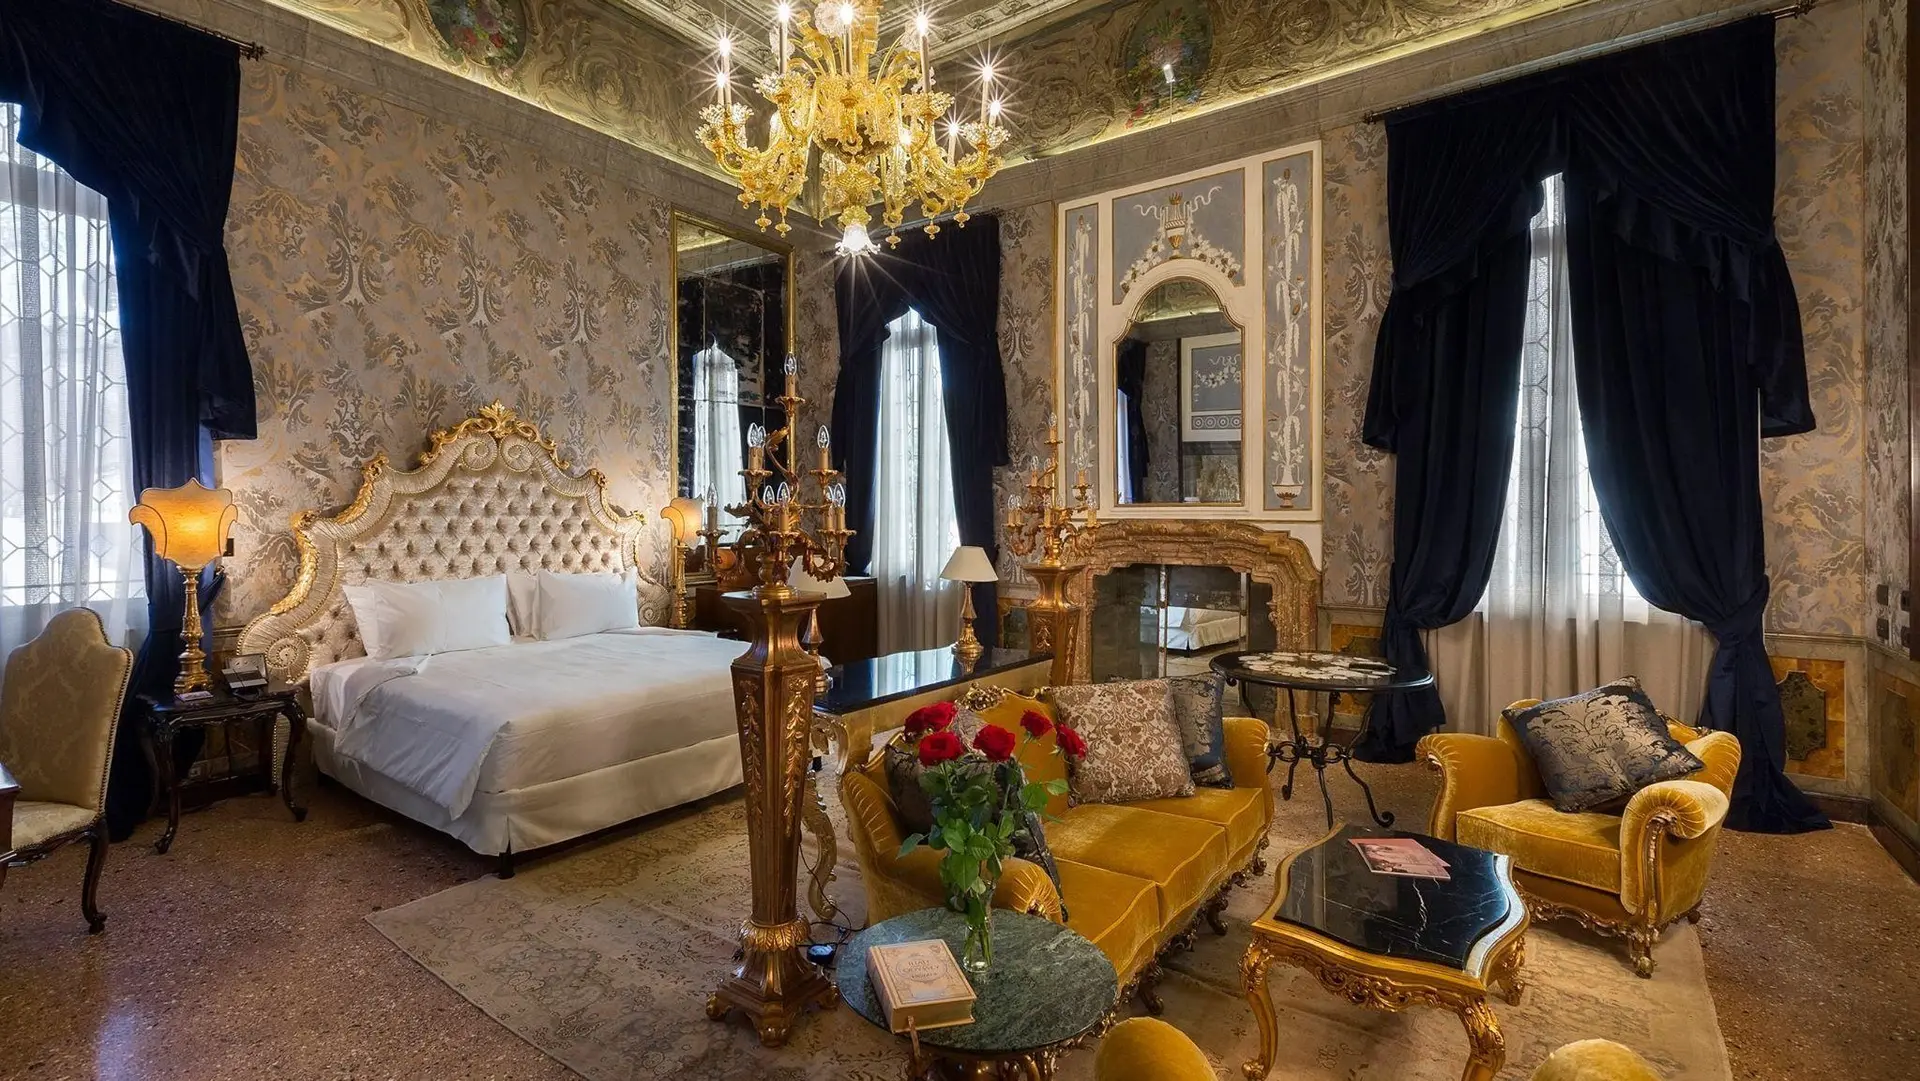 Grand suite bedroom at Palazzo Venart with large space, kingsize bed and couches